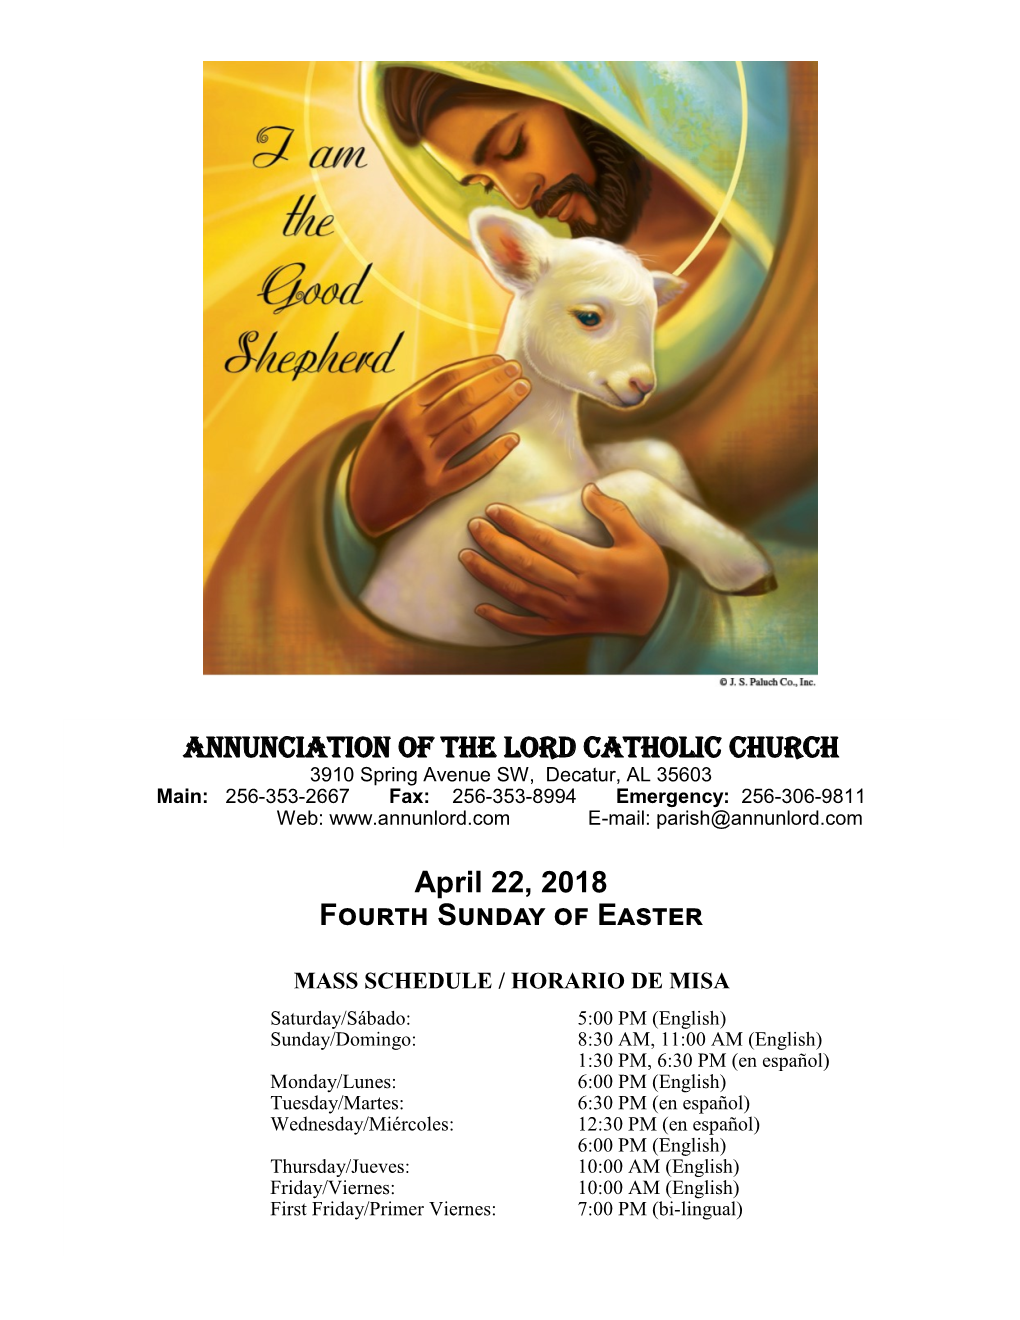 ANNUNCIATION of the LORD CATHOLIC CHURCH April 22